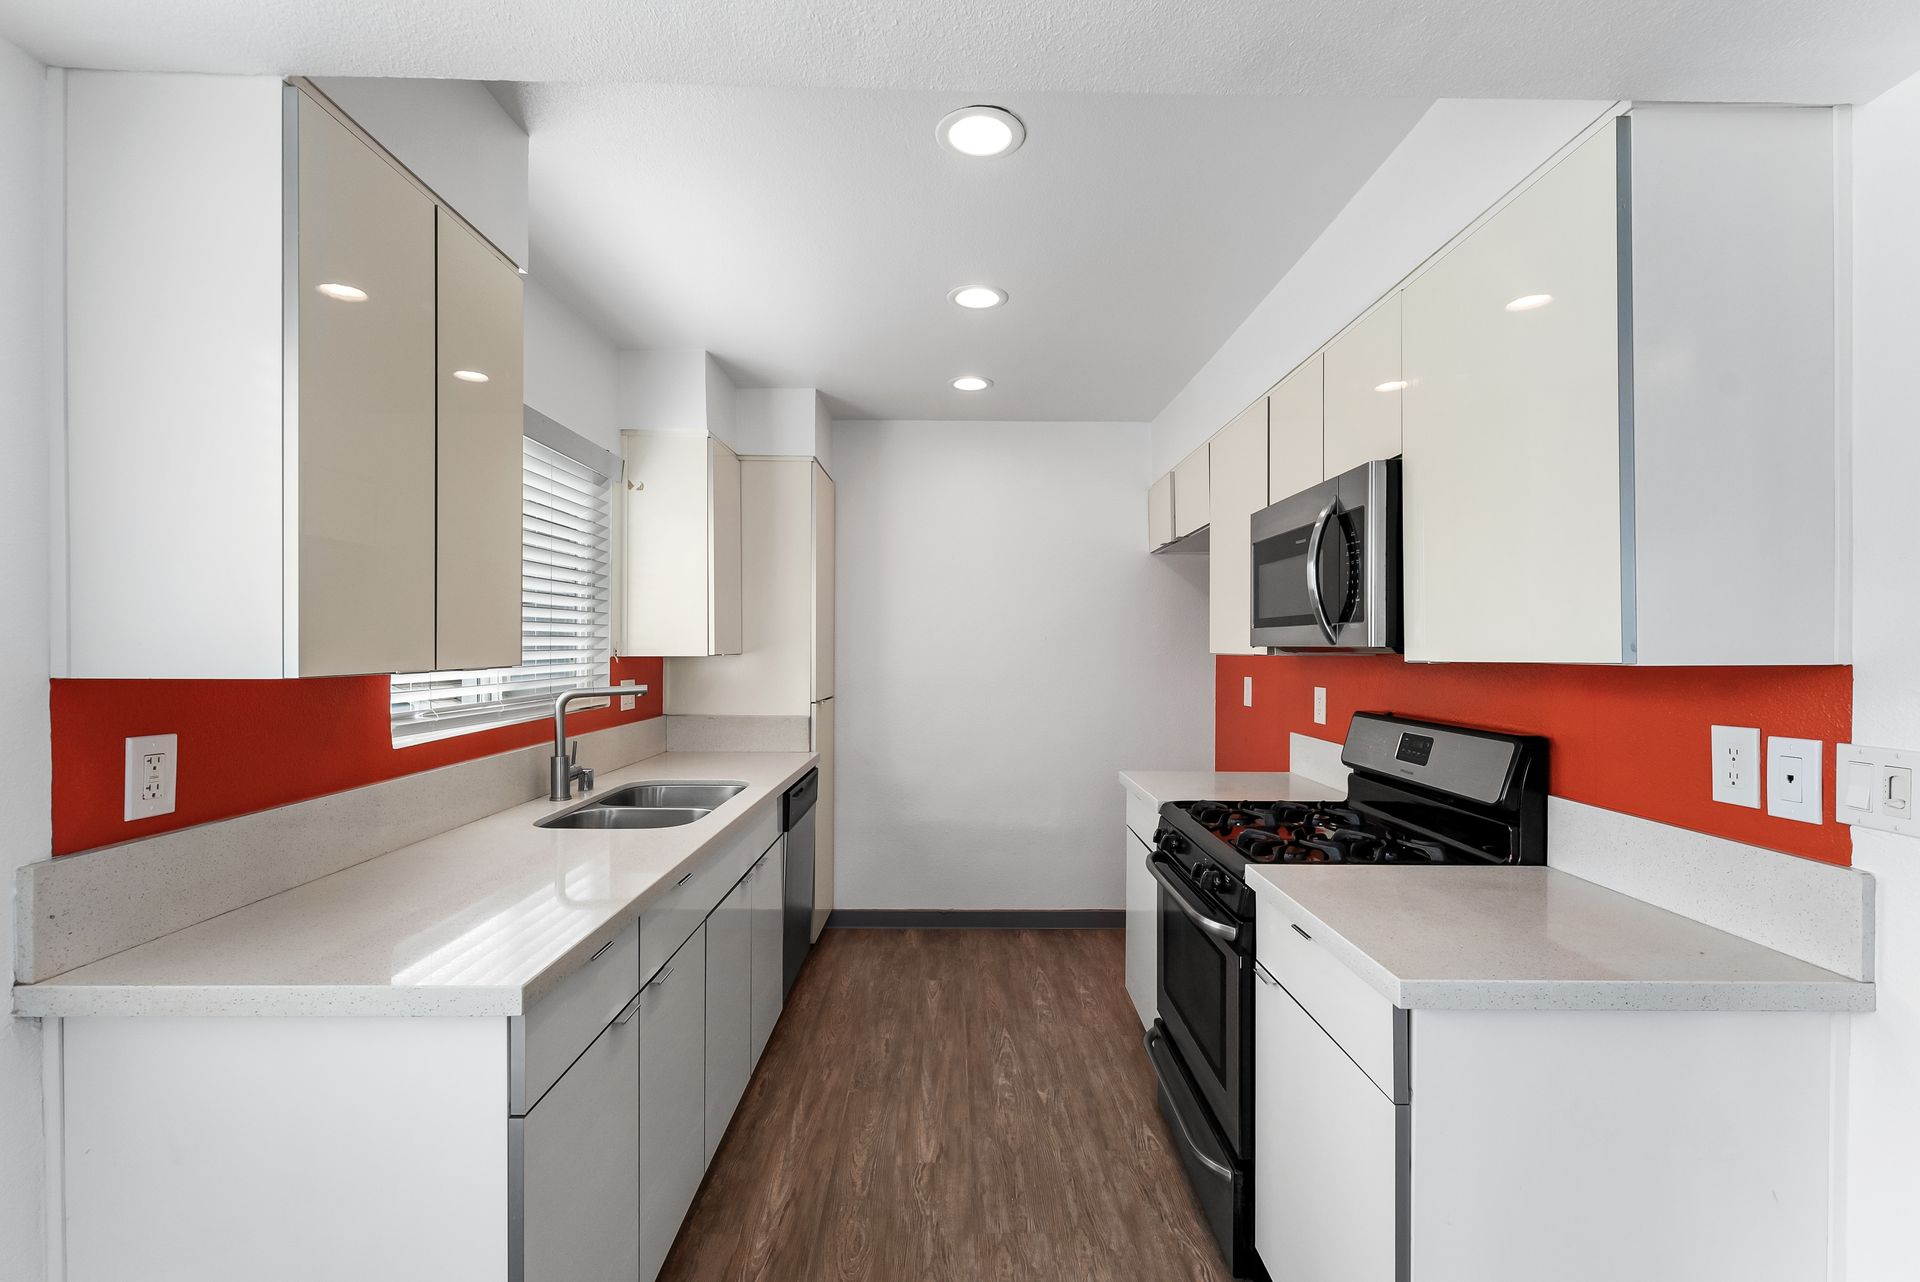 Sliding Photo Gallery Displaying Apartment Features- Kitchen with orange wall, white cabinets and counters, black stove